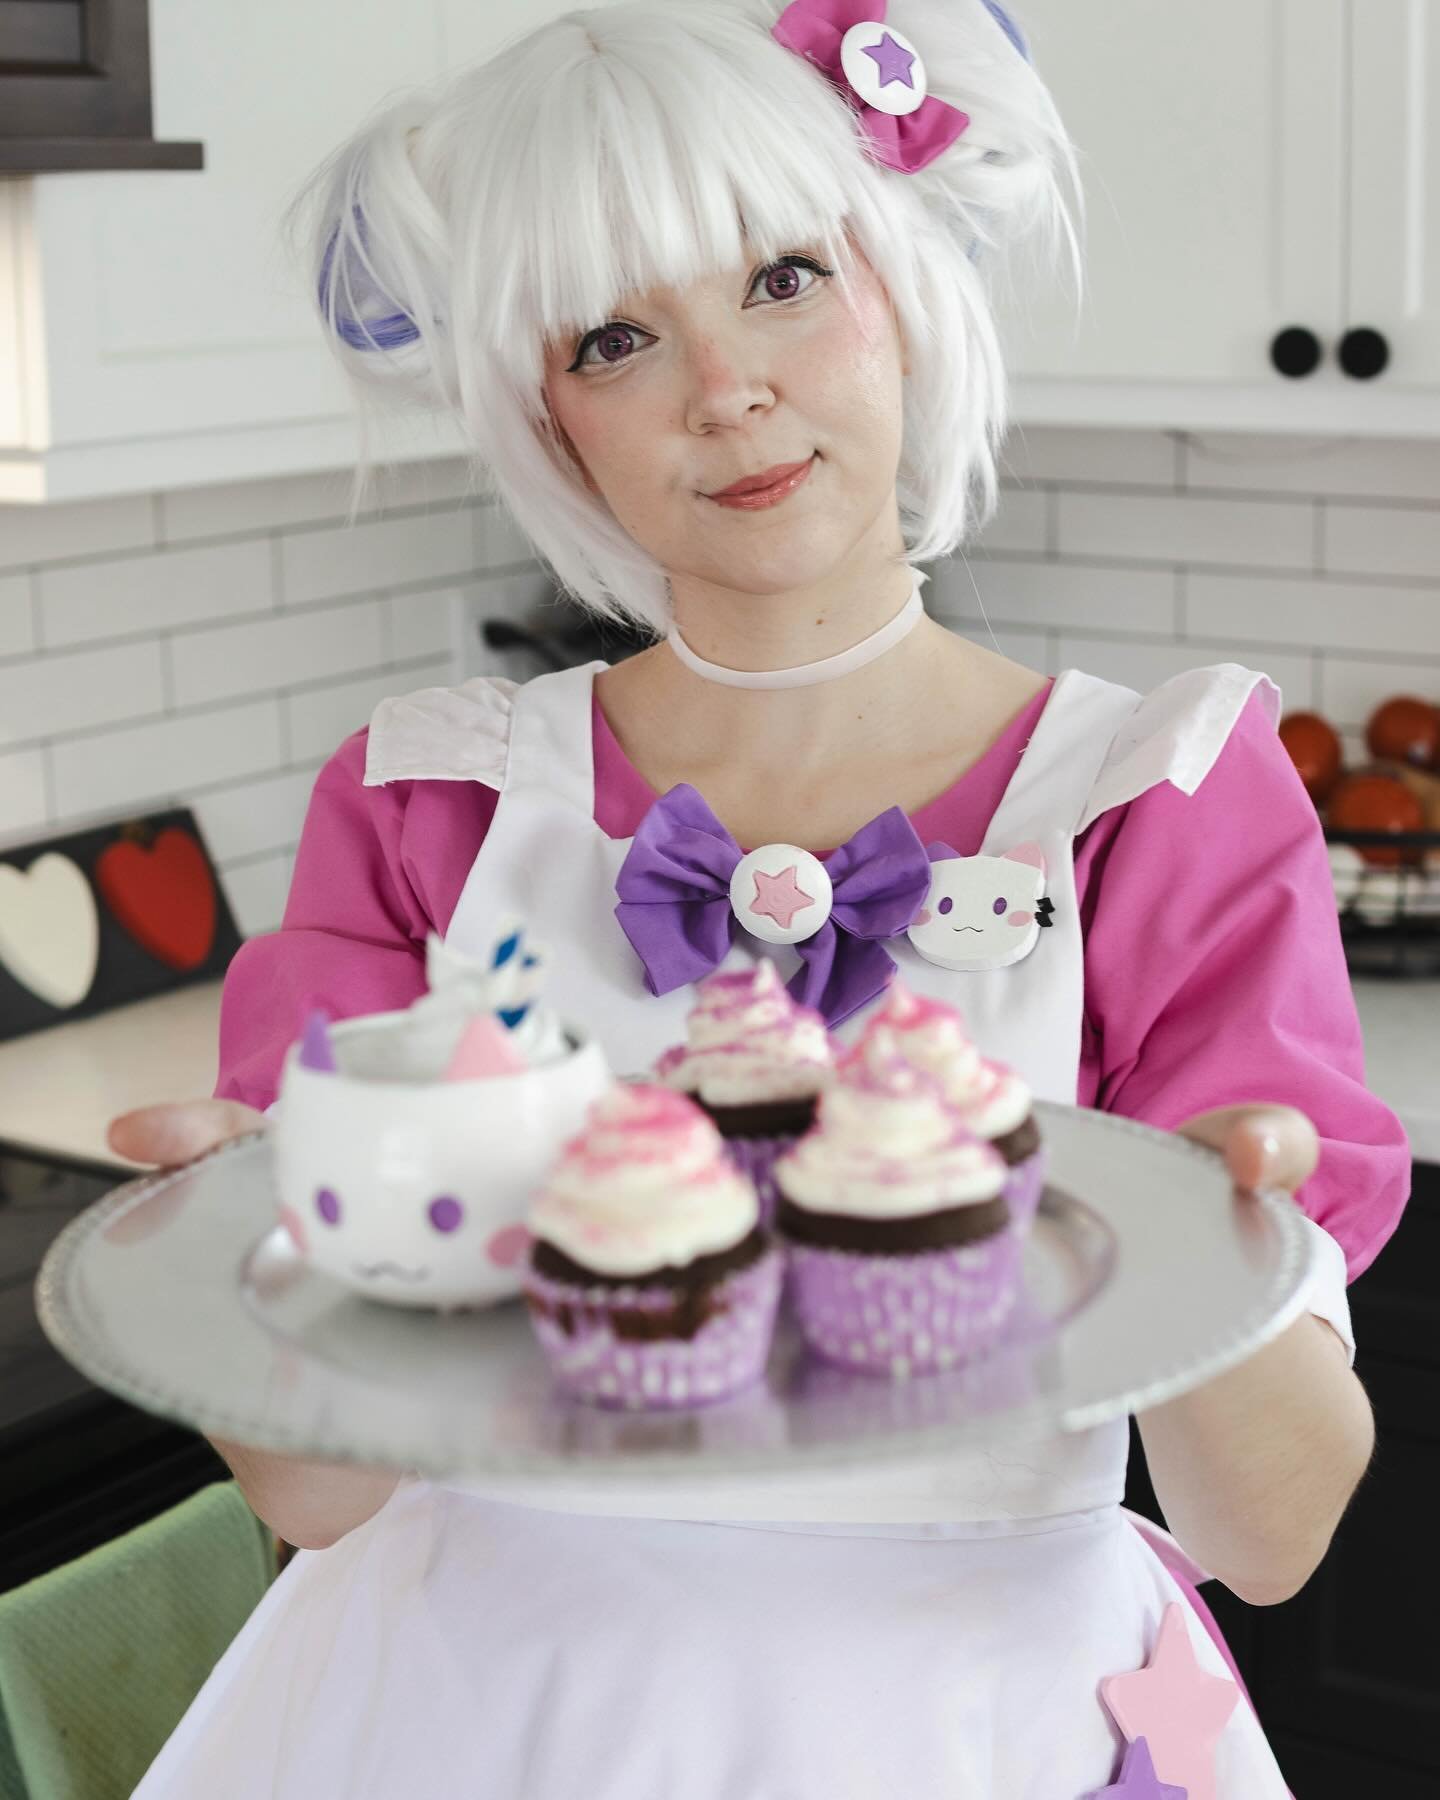 Yooo I finally cosplayed my friend @devicat.art &lsquo;s OC! As soon as I saw the art of the maid&hellip; I got to work on the cosplay 😈 
Costume made by me
Accessories + cup modelled and 3D printed by me
Photo by @kommisar_chiptune 
Lenses @uniqso 